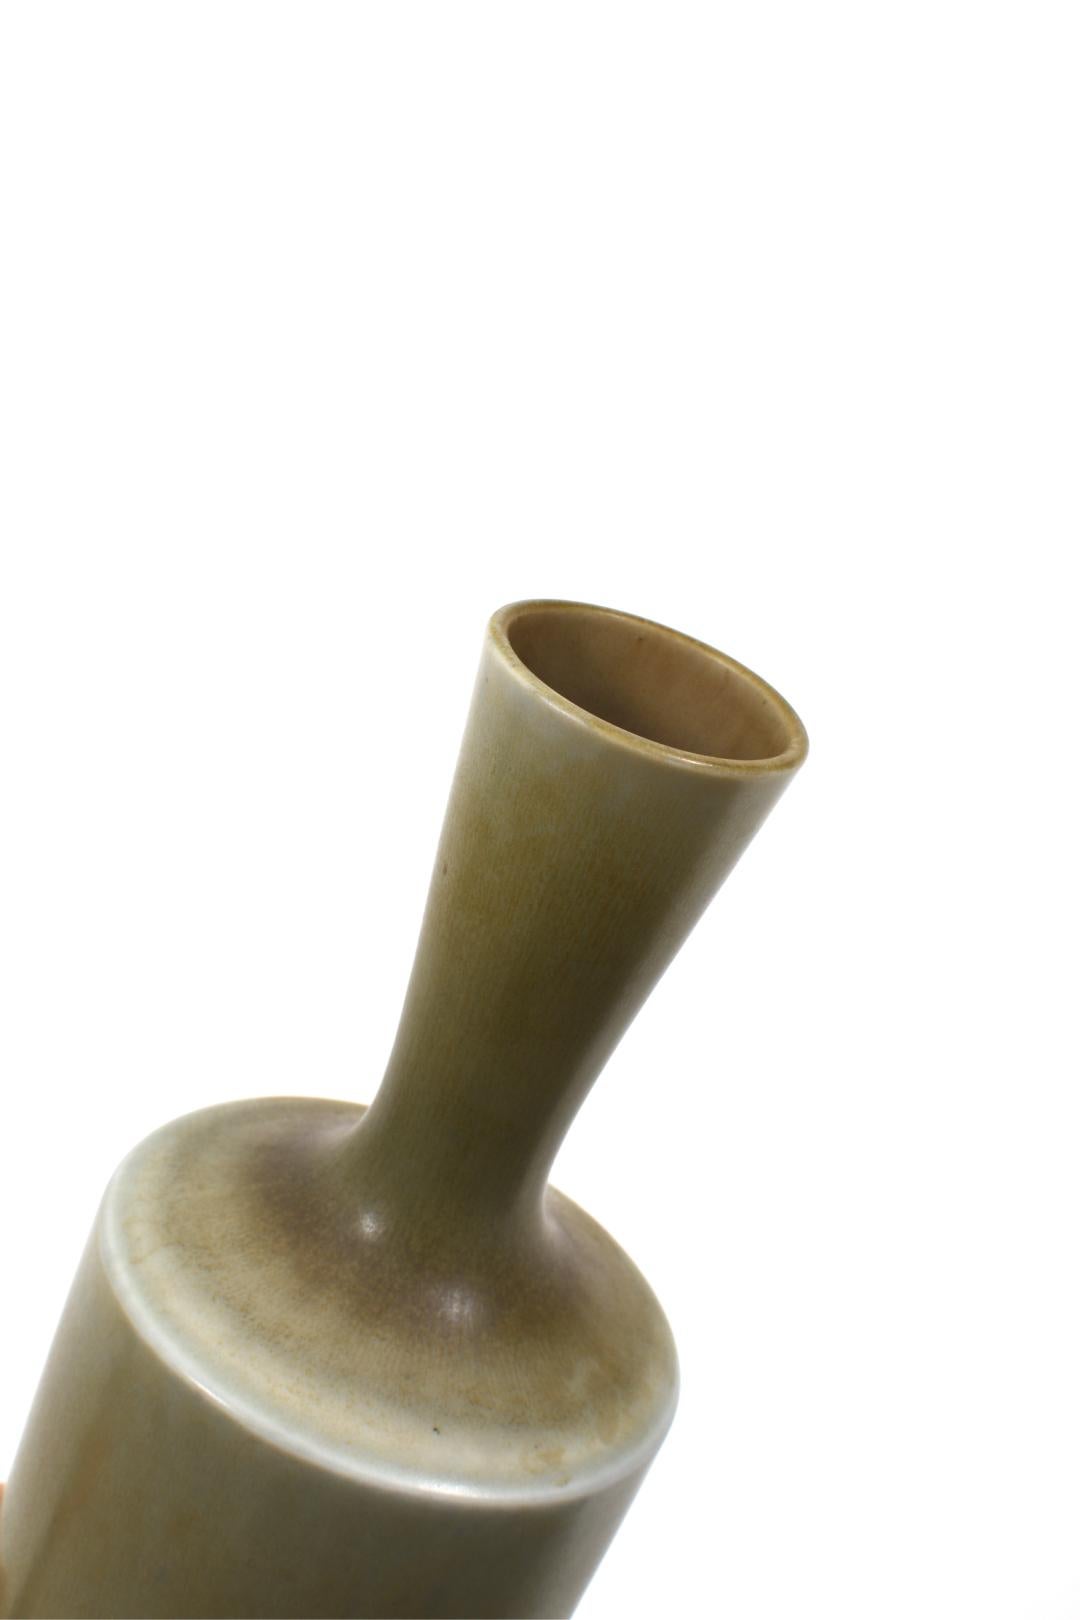 Stoneware vase from Gustavsberg by Berndt Friberg green Harpel glaze with brown shades. Signed Friberg and Studiohanden.